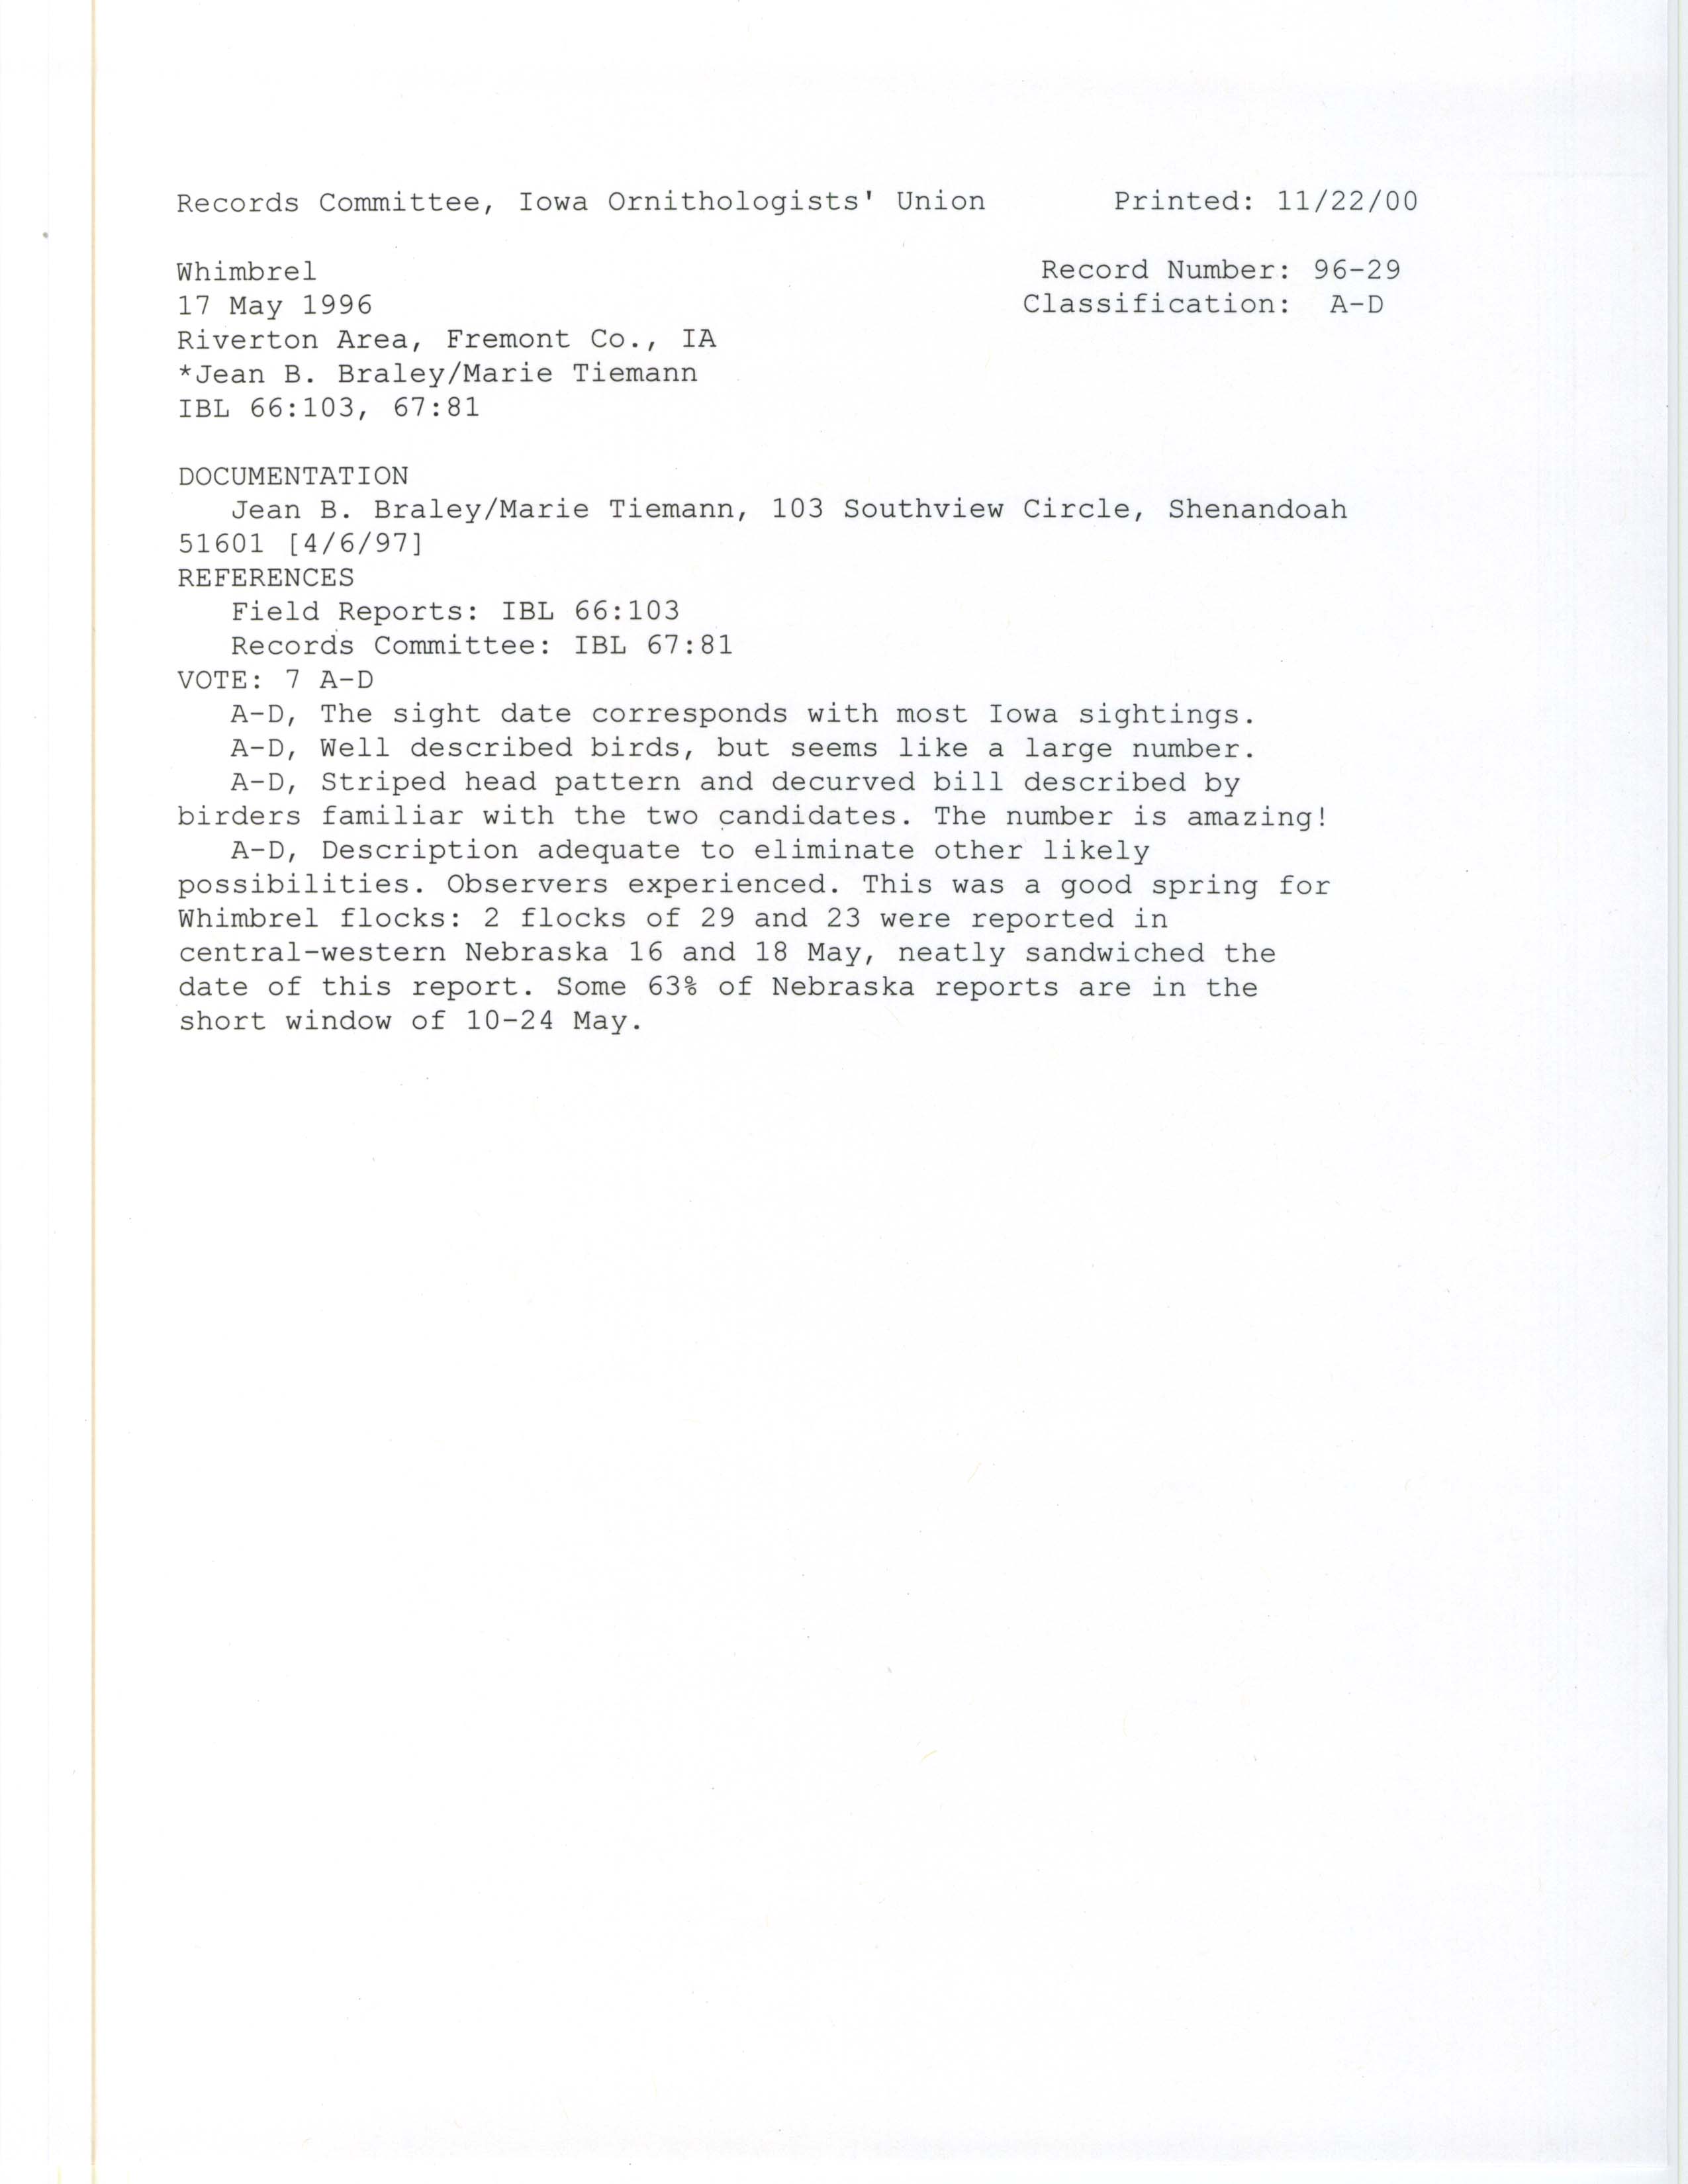 Records Committee review for rare bird sighting of Whimbrel at Riverton Wildlife Management Area, 1996